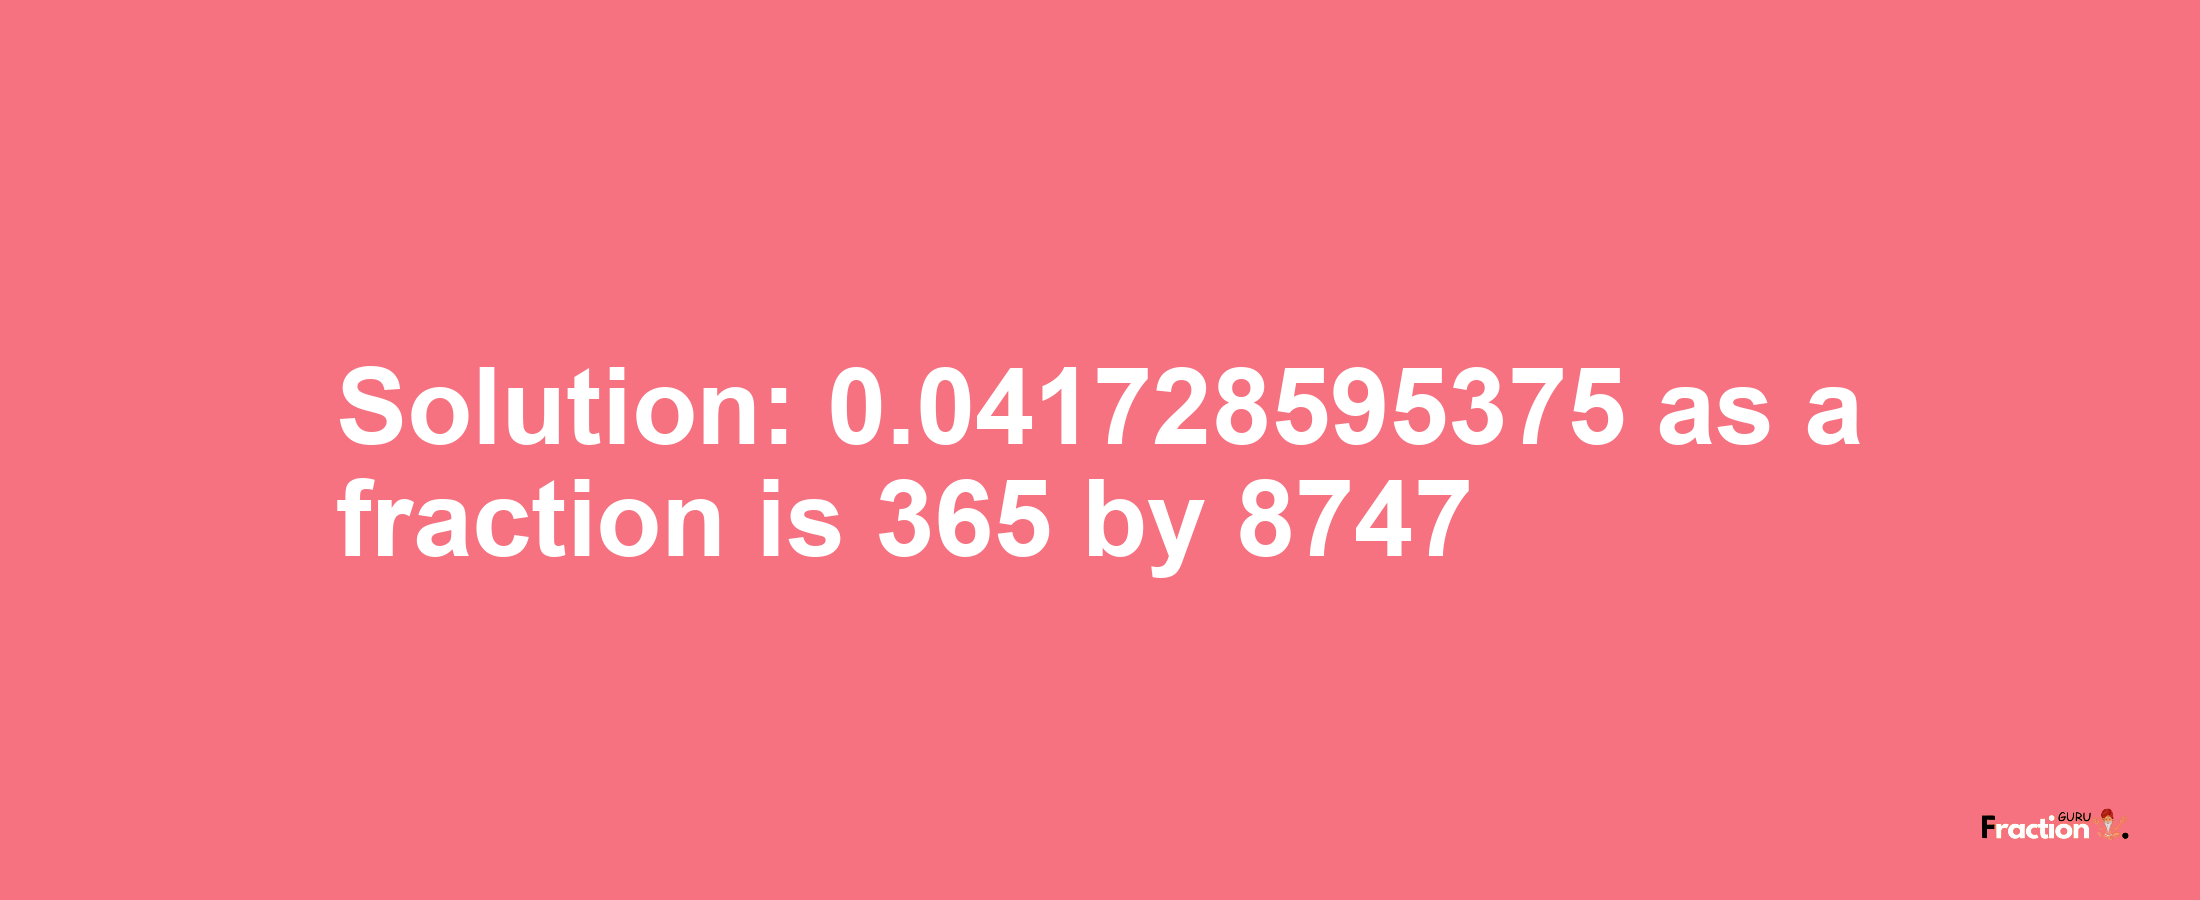 Solution:0.041728595375 as a fraction is 365/8747